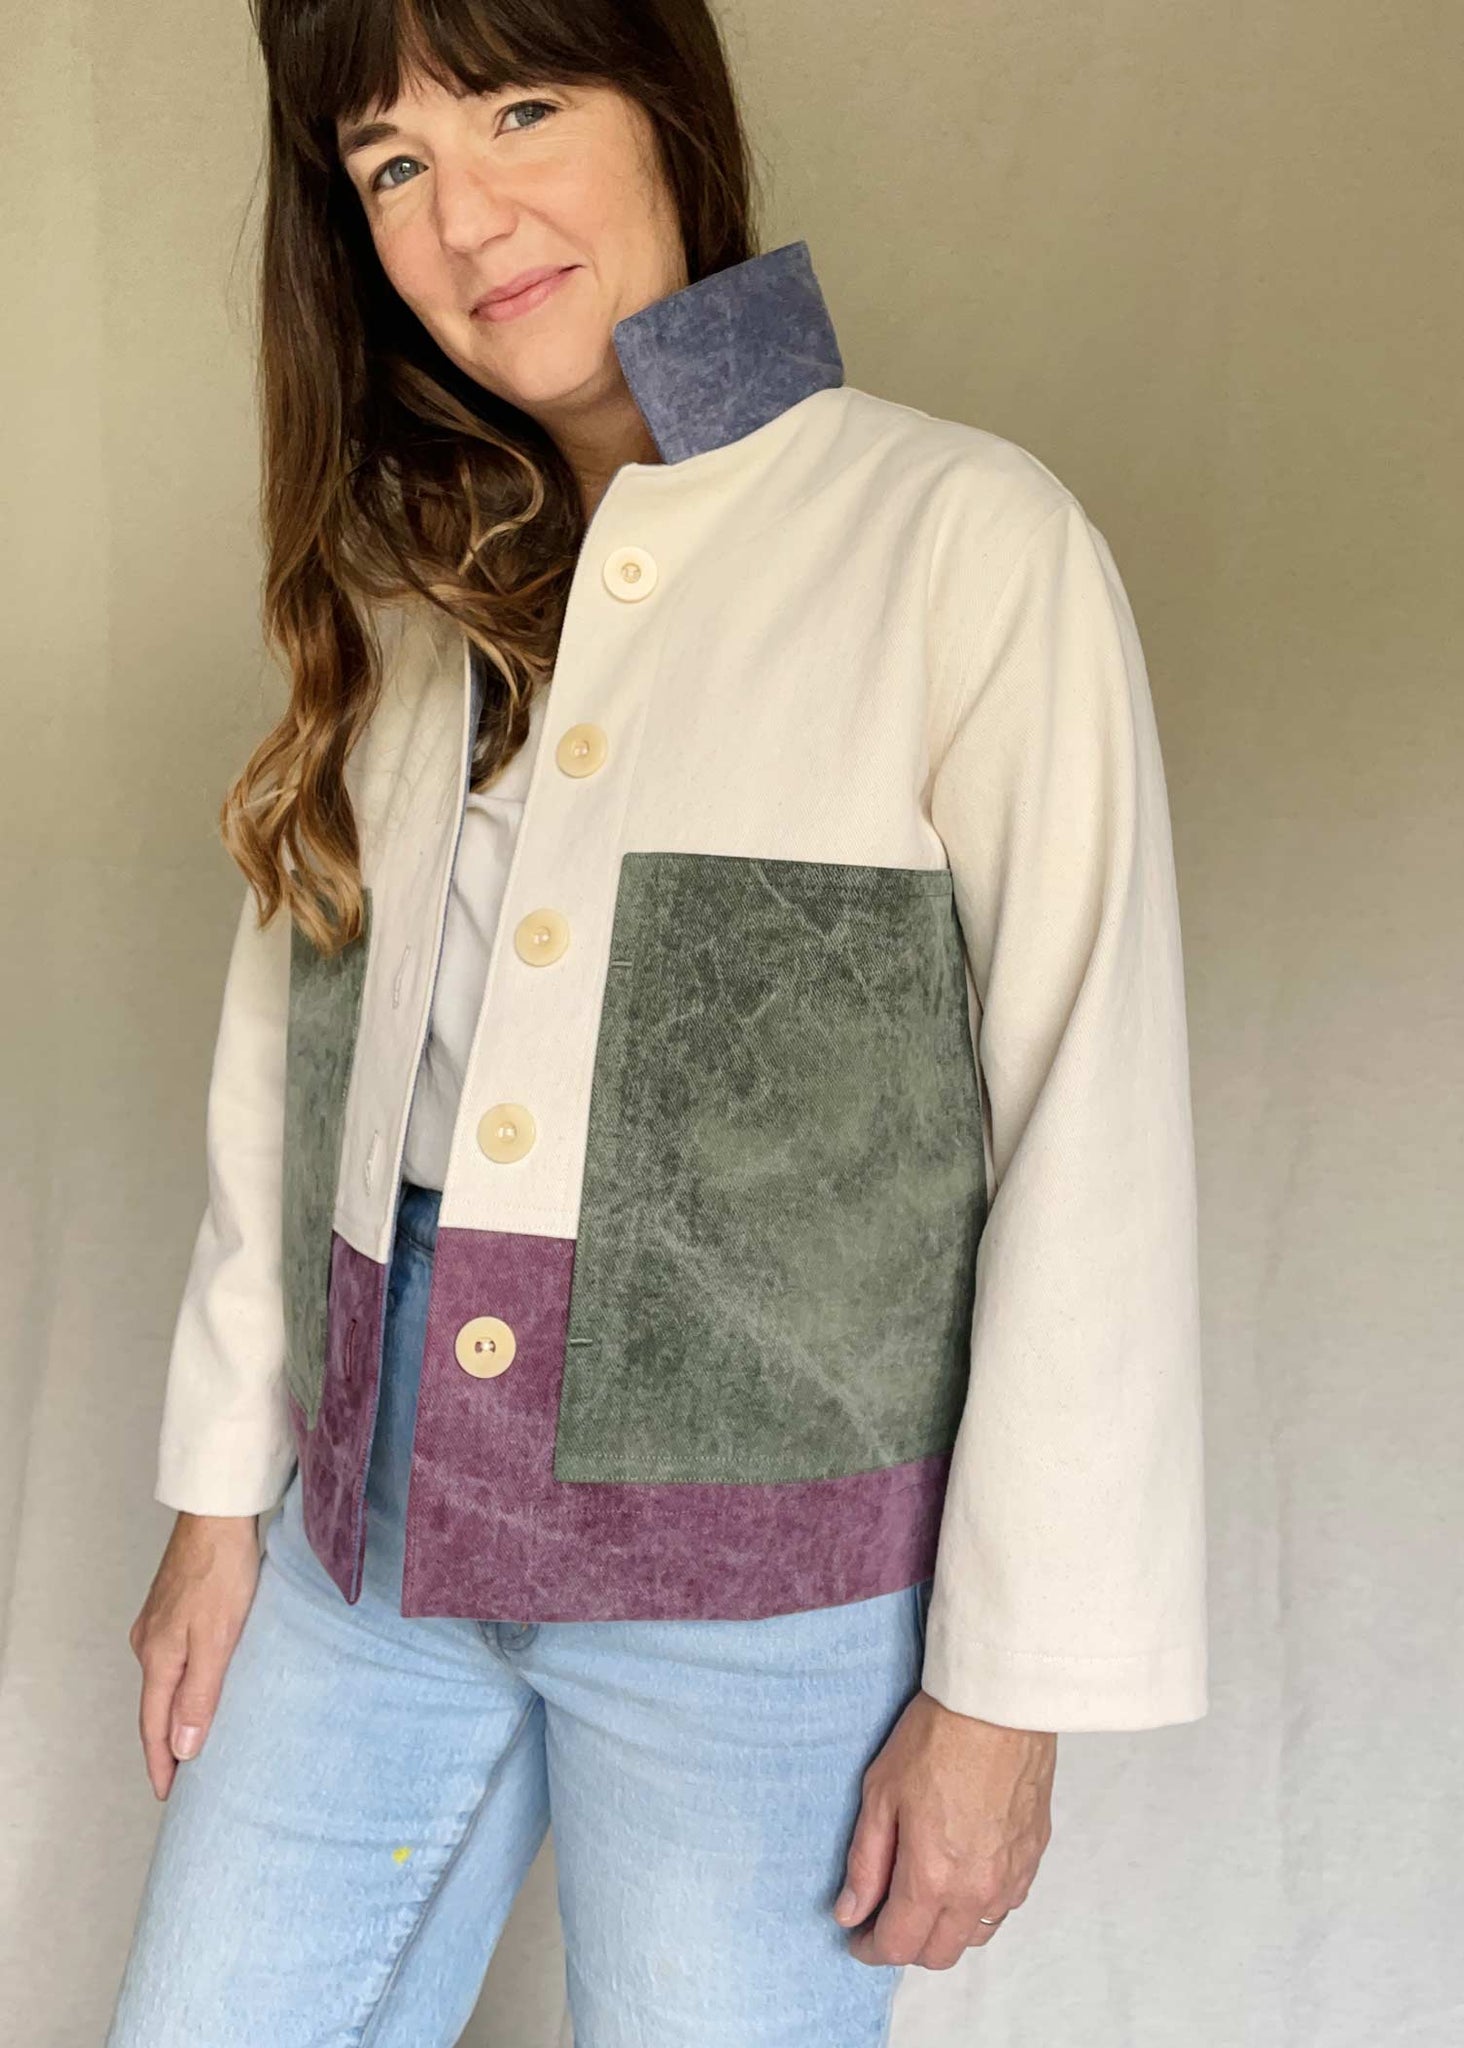 Made-to-order Color Block Jacket: Cream color body for Shaira